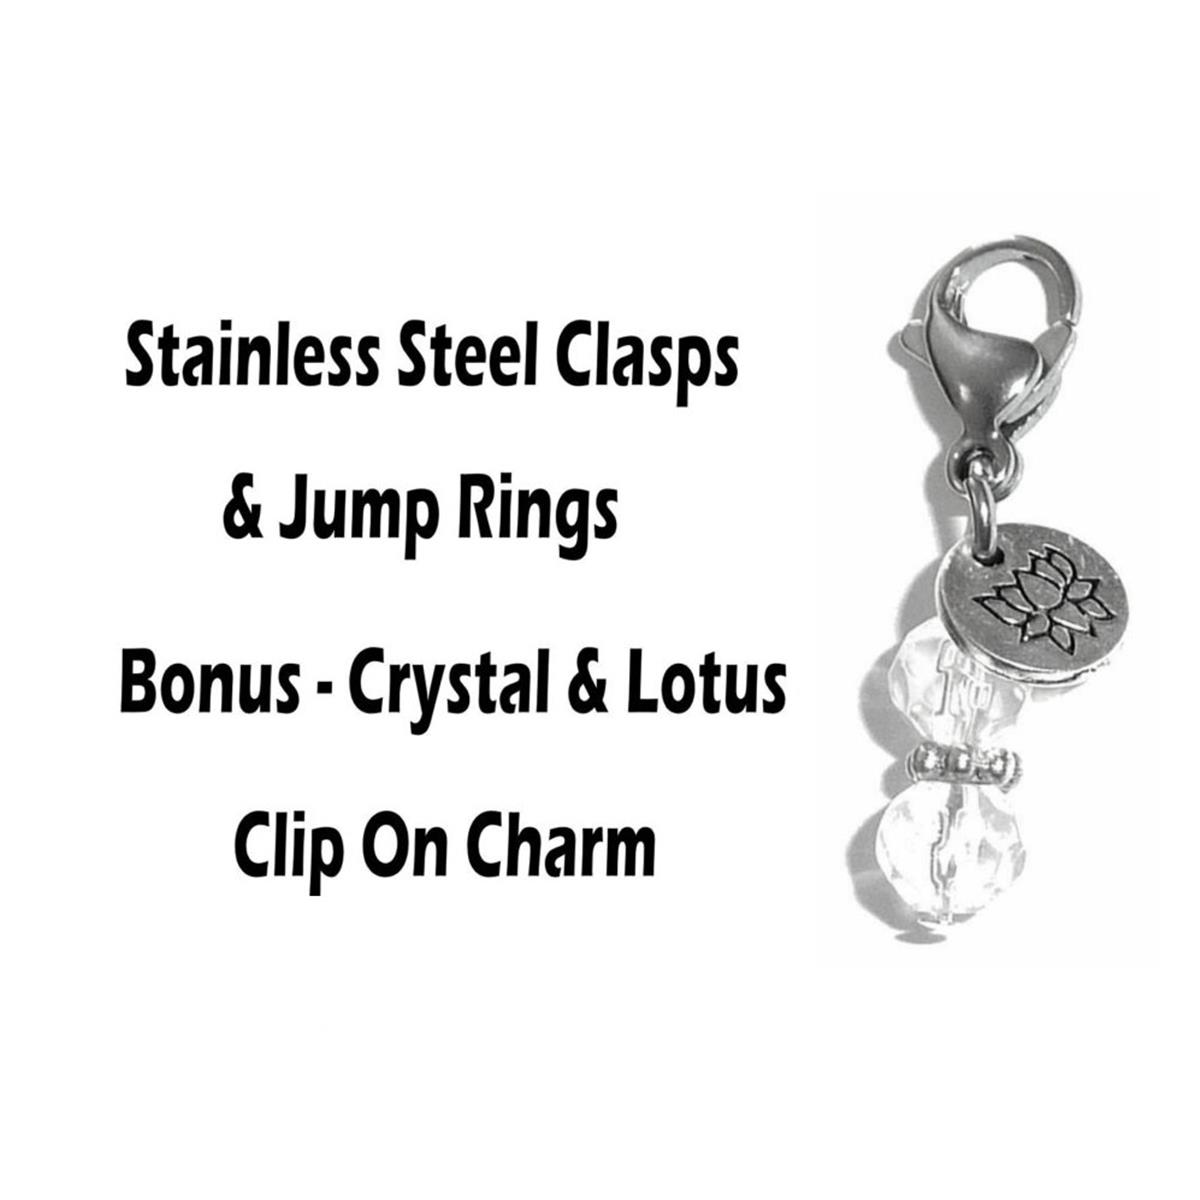 Love Clip On Charms - Whimsical Charms Clip On Anywhere